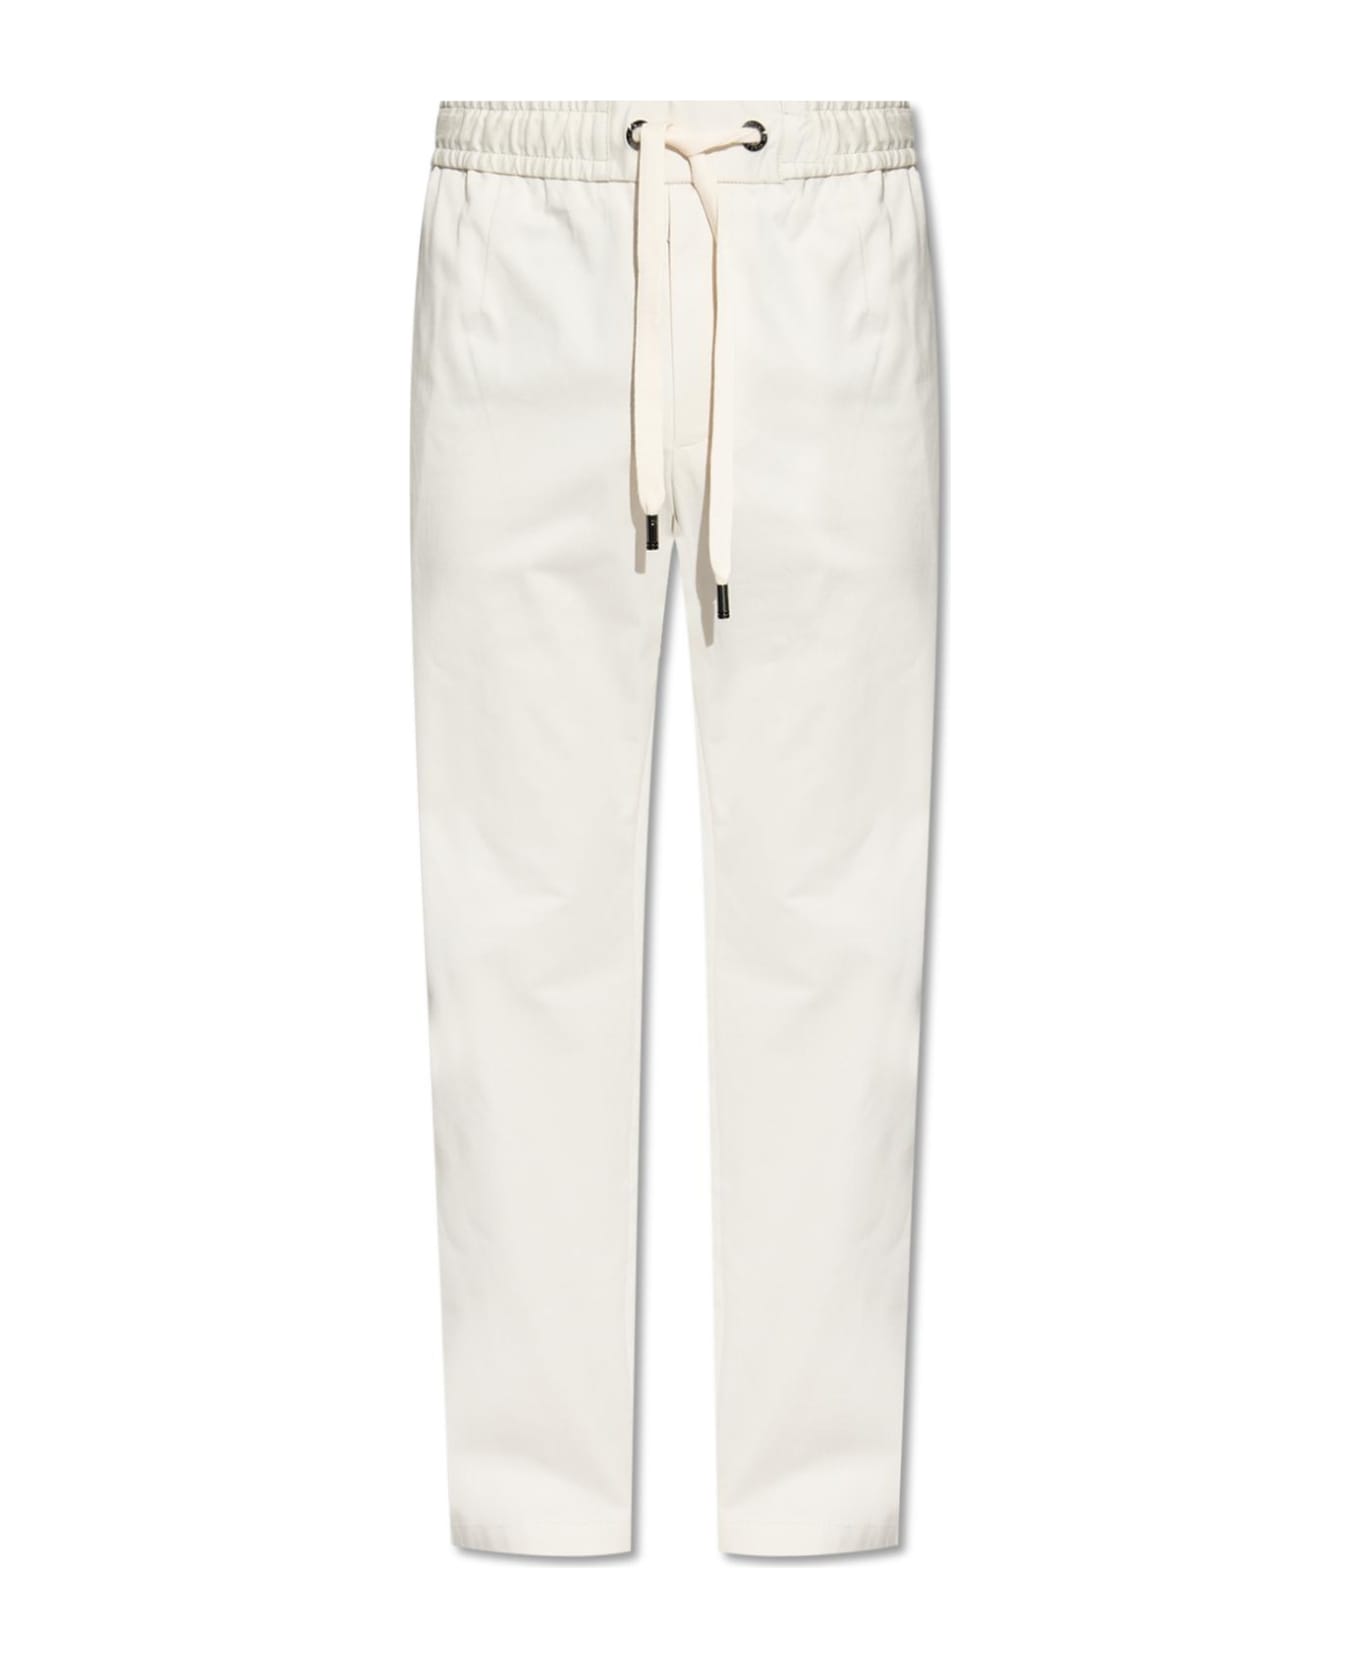 Dolce & Gabbana Cotton Trousers - Beige ボトムス